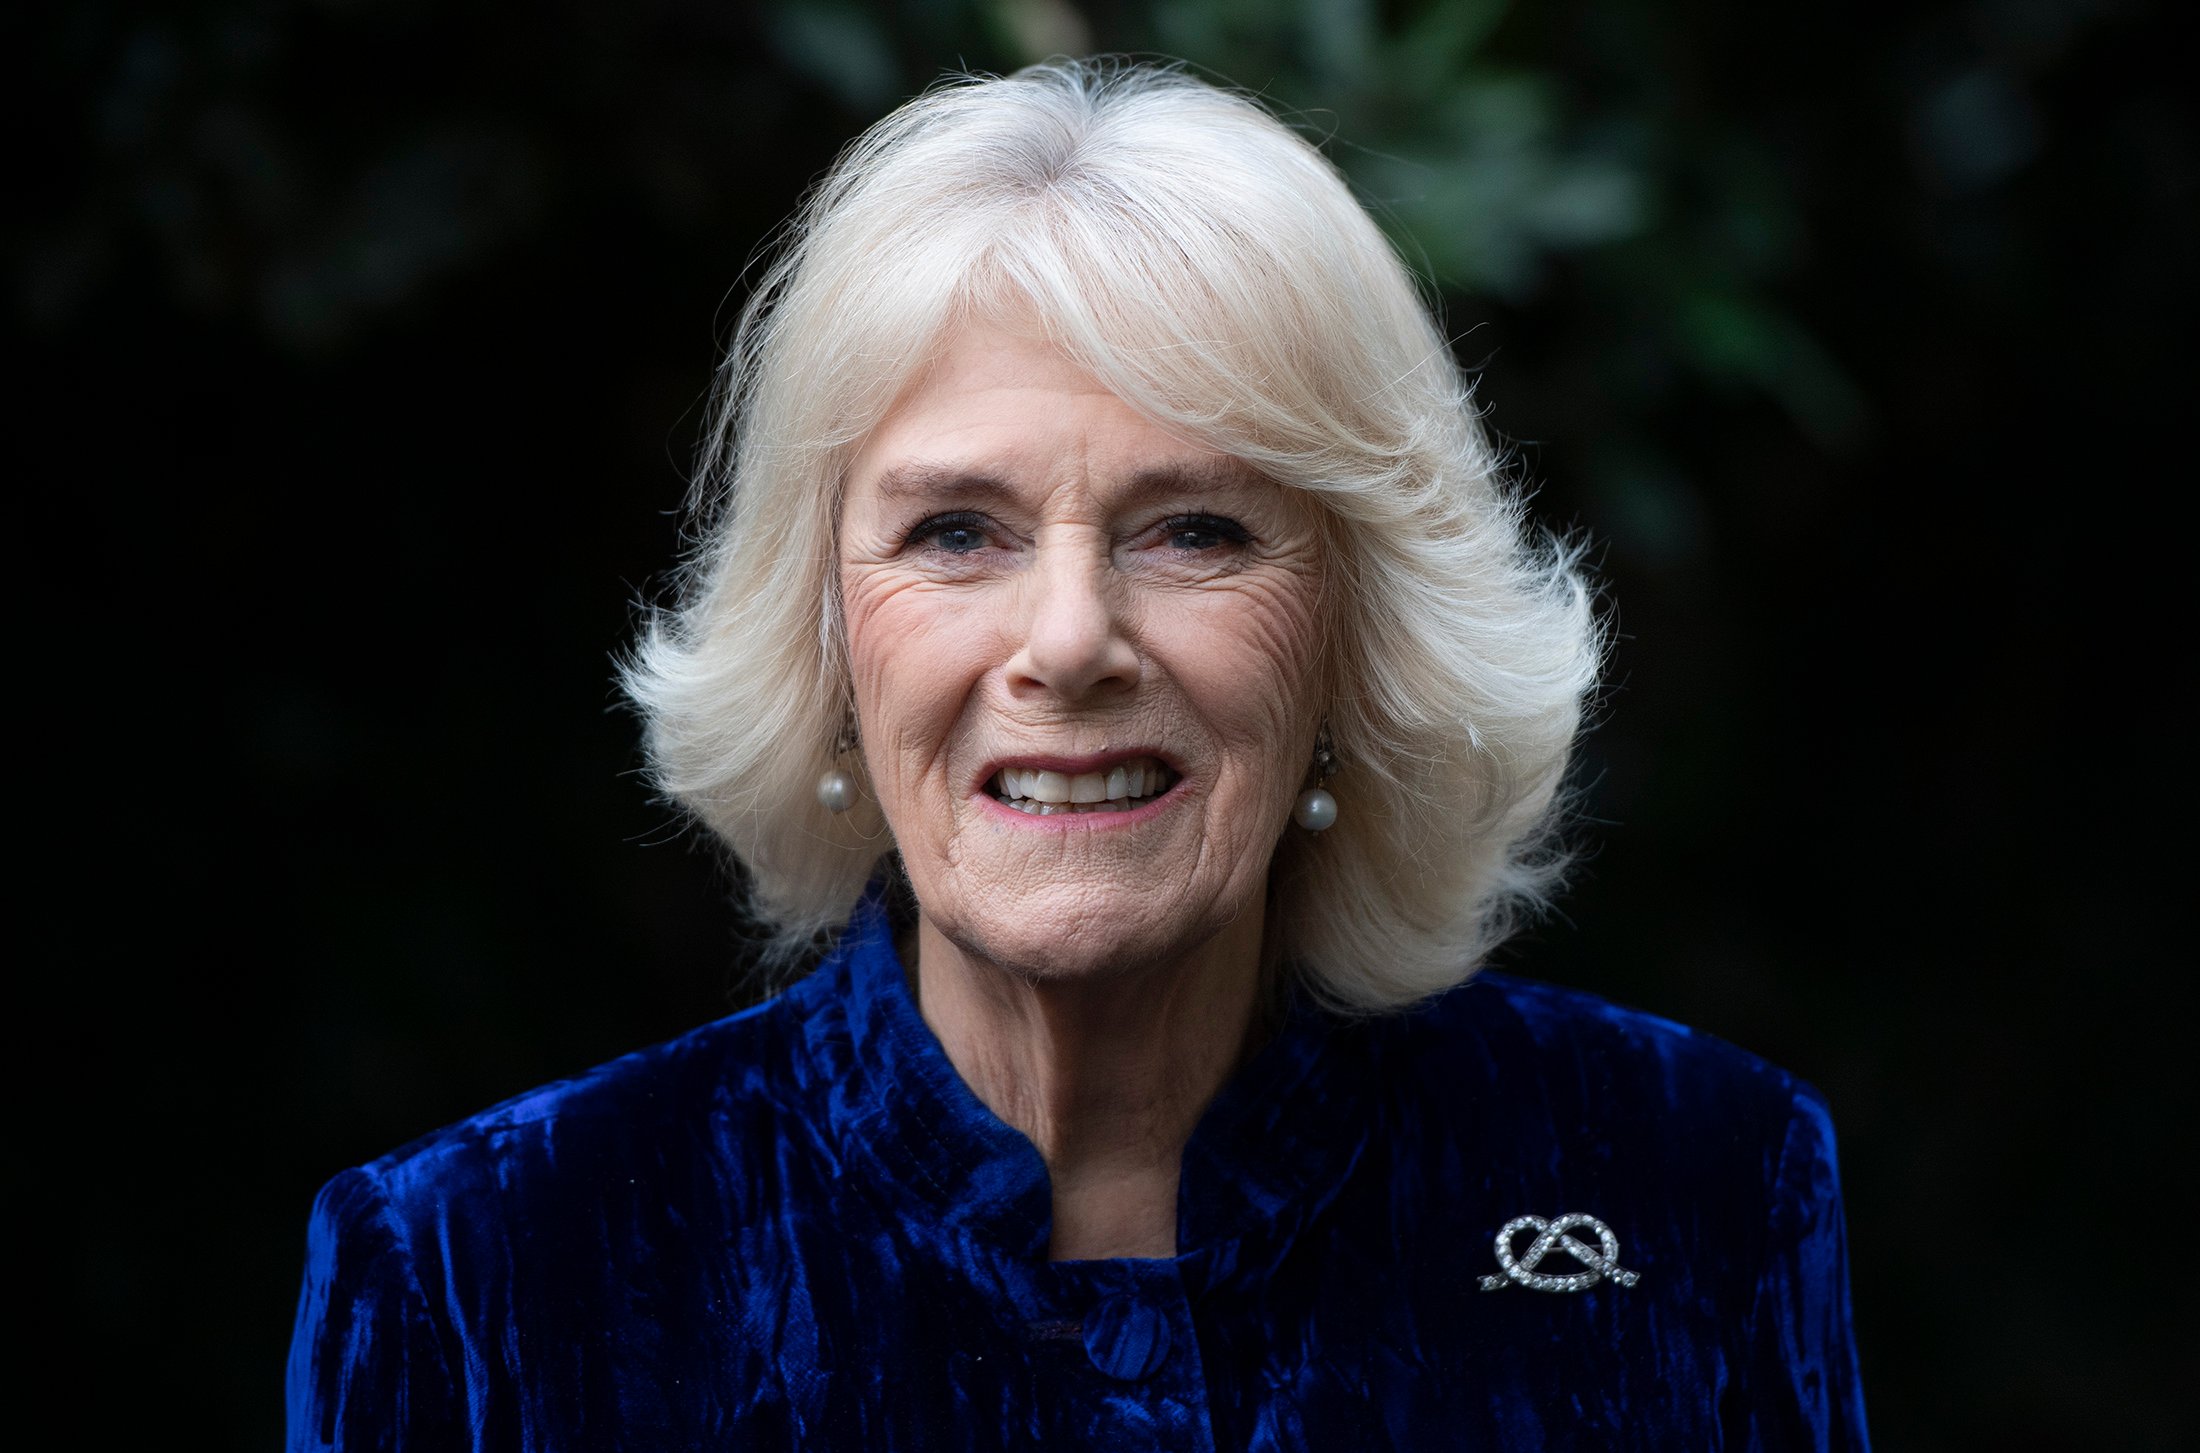 Camilla Parker Bowles, Queen Consort, smiles while wearing a royal blue velvet outfit.